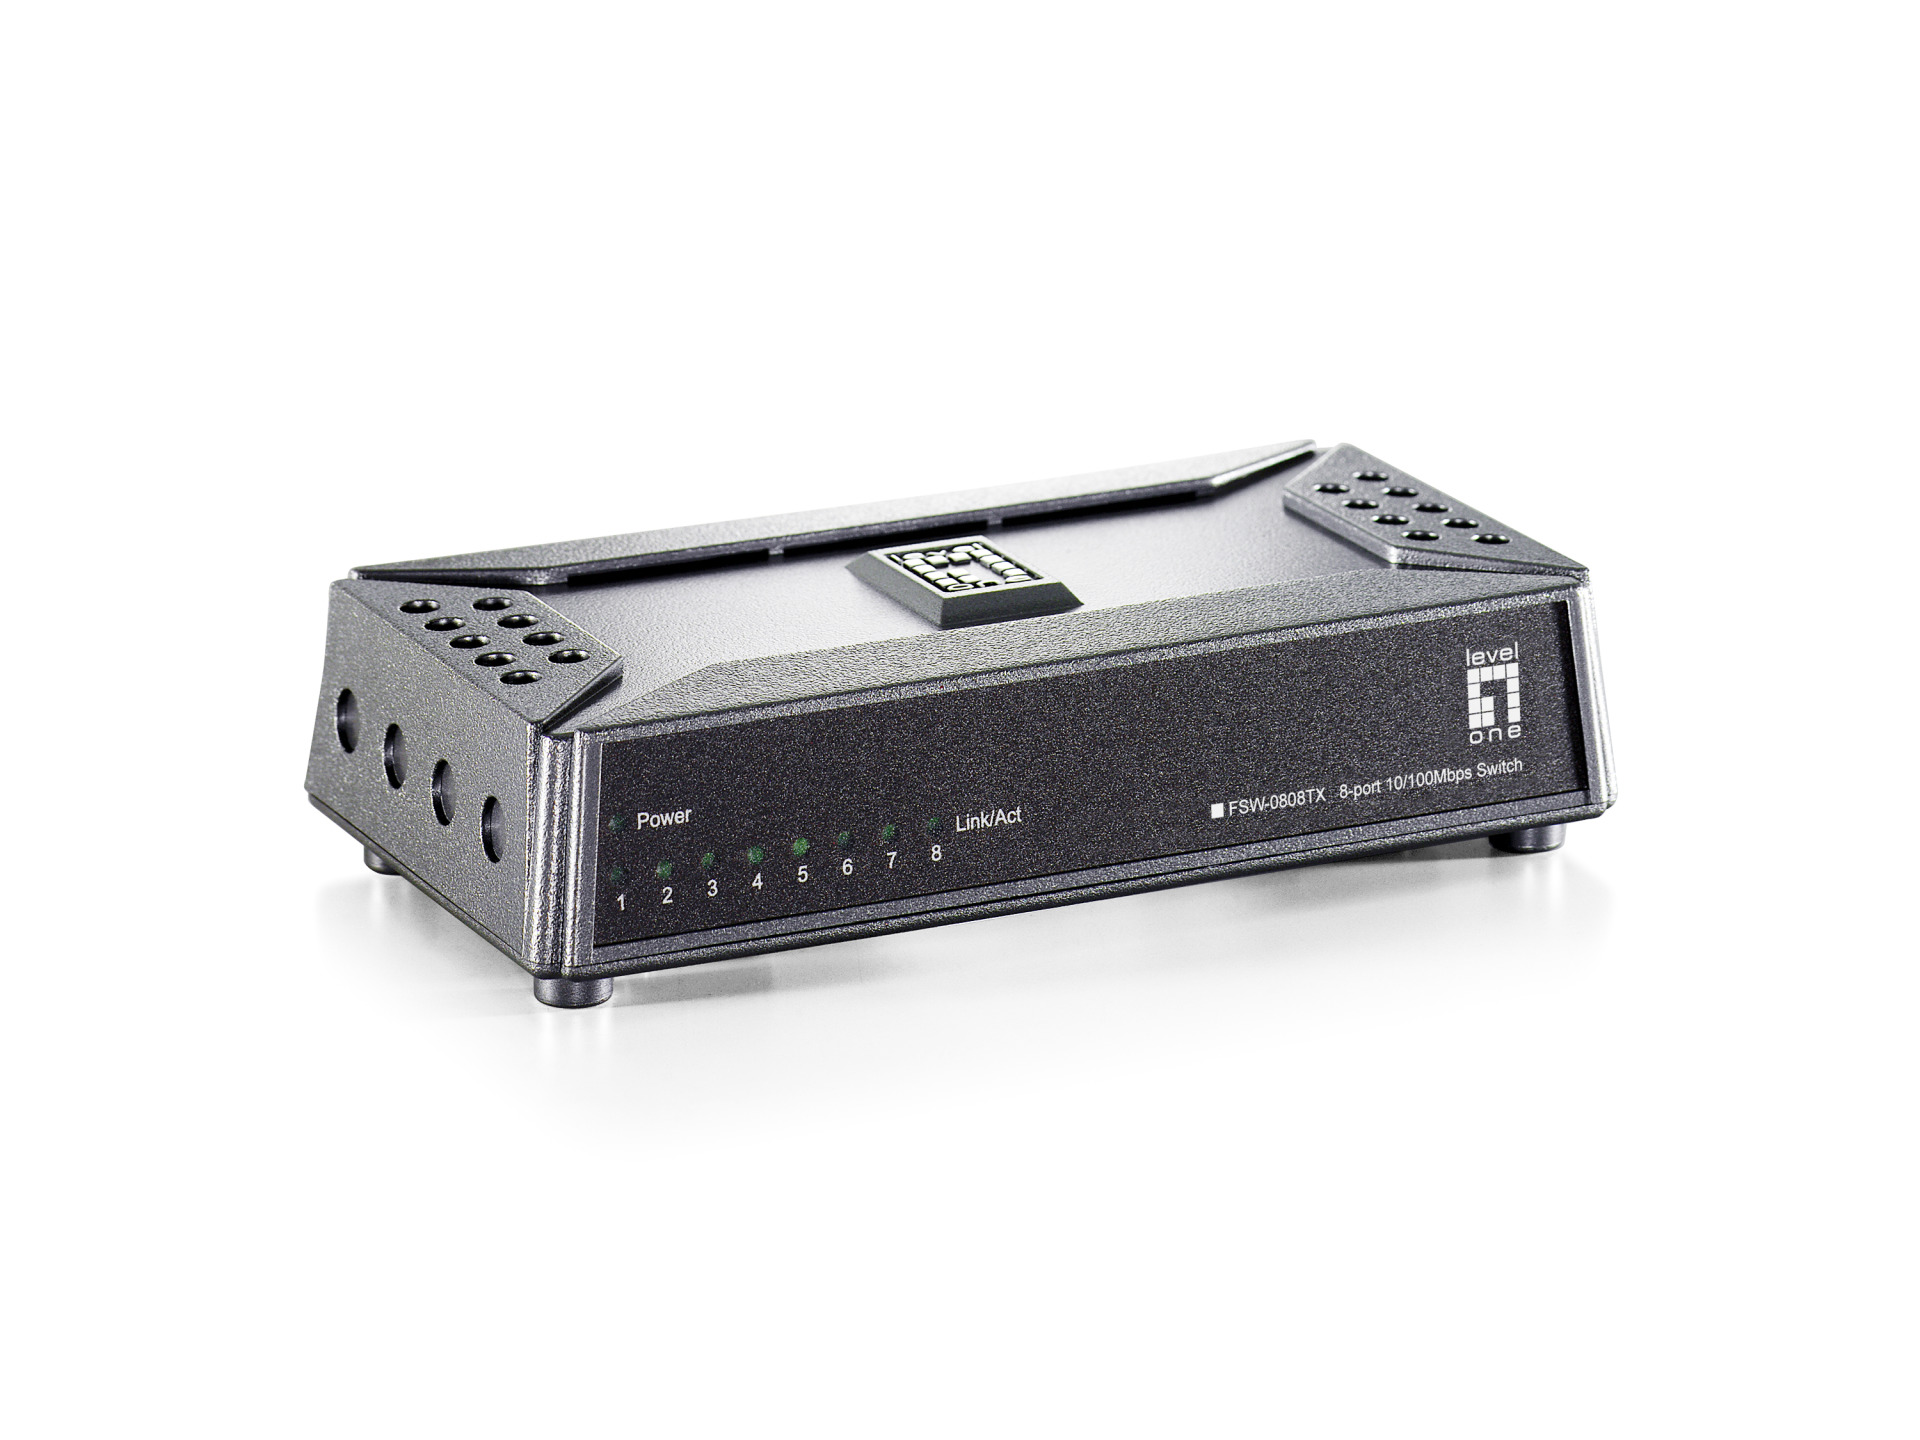 8-Port Fast Ethernet Switch, ultracompact